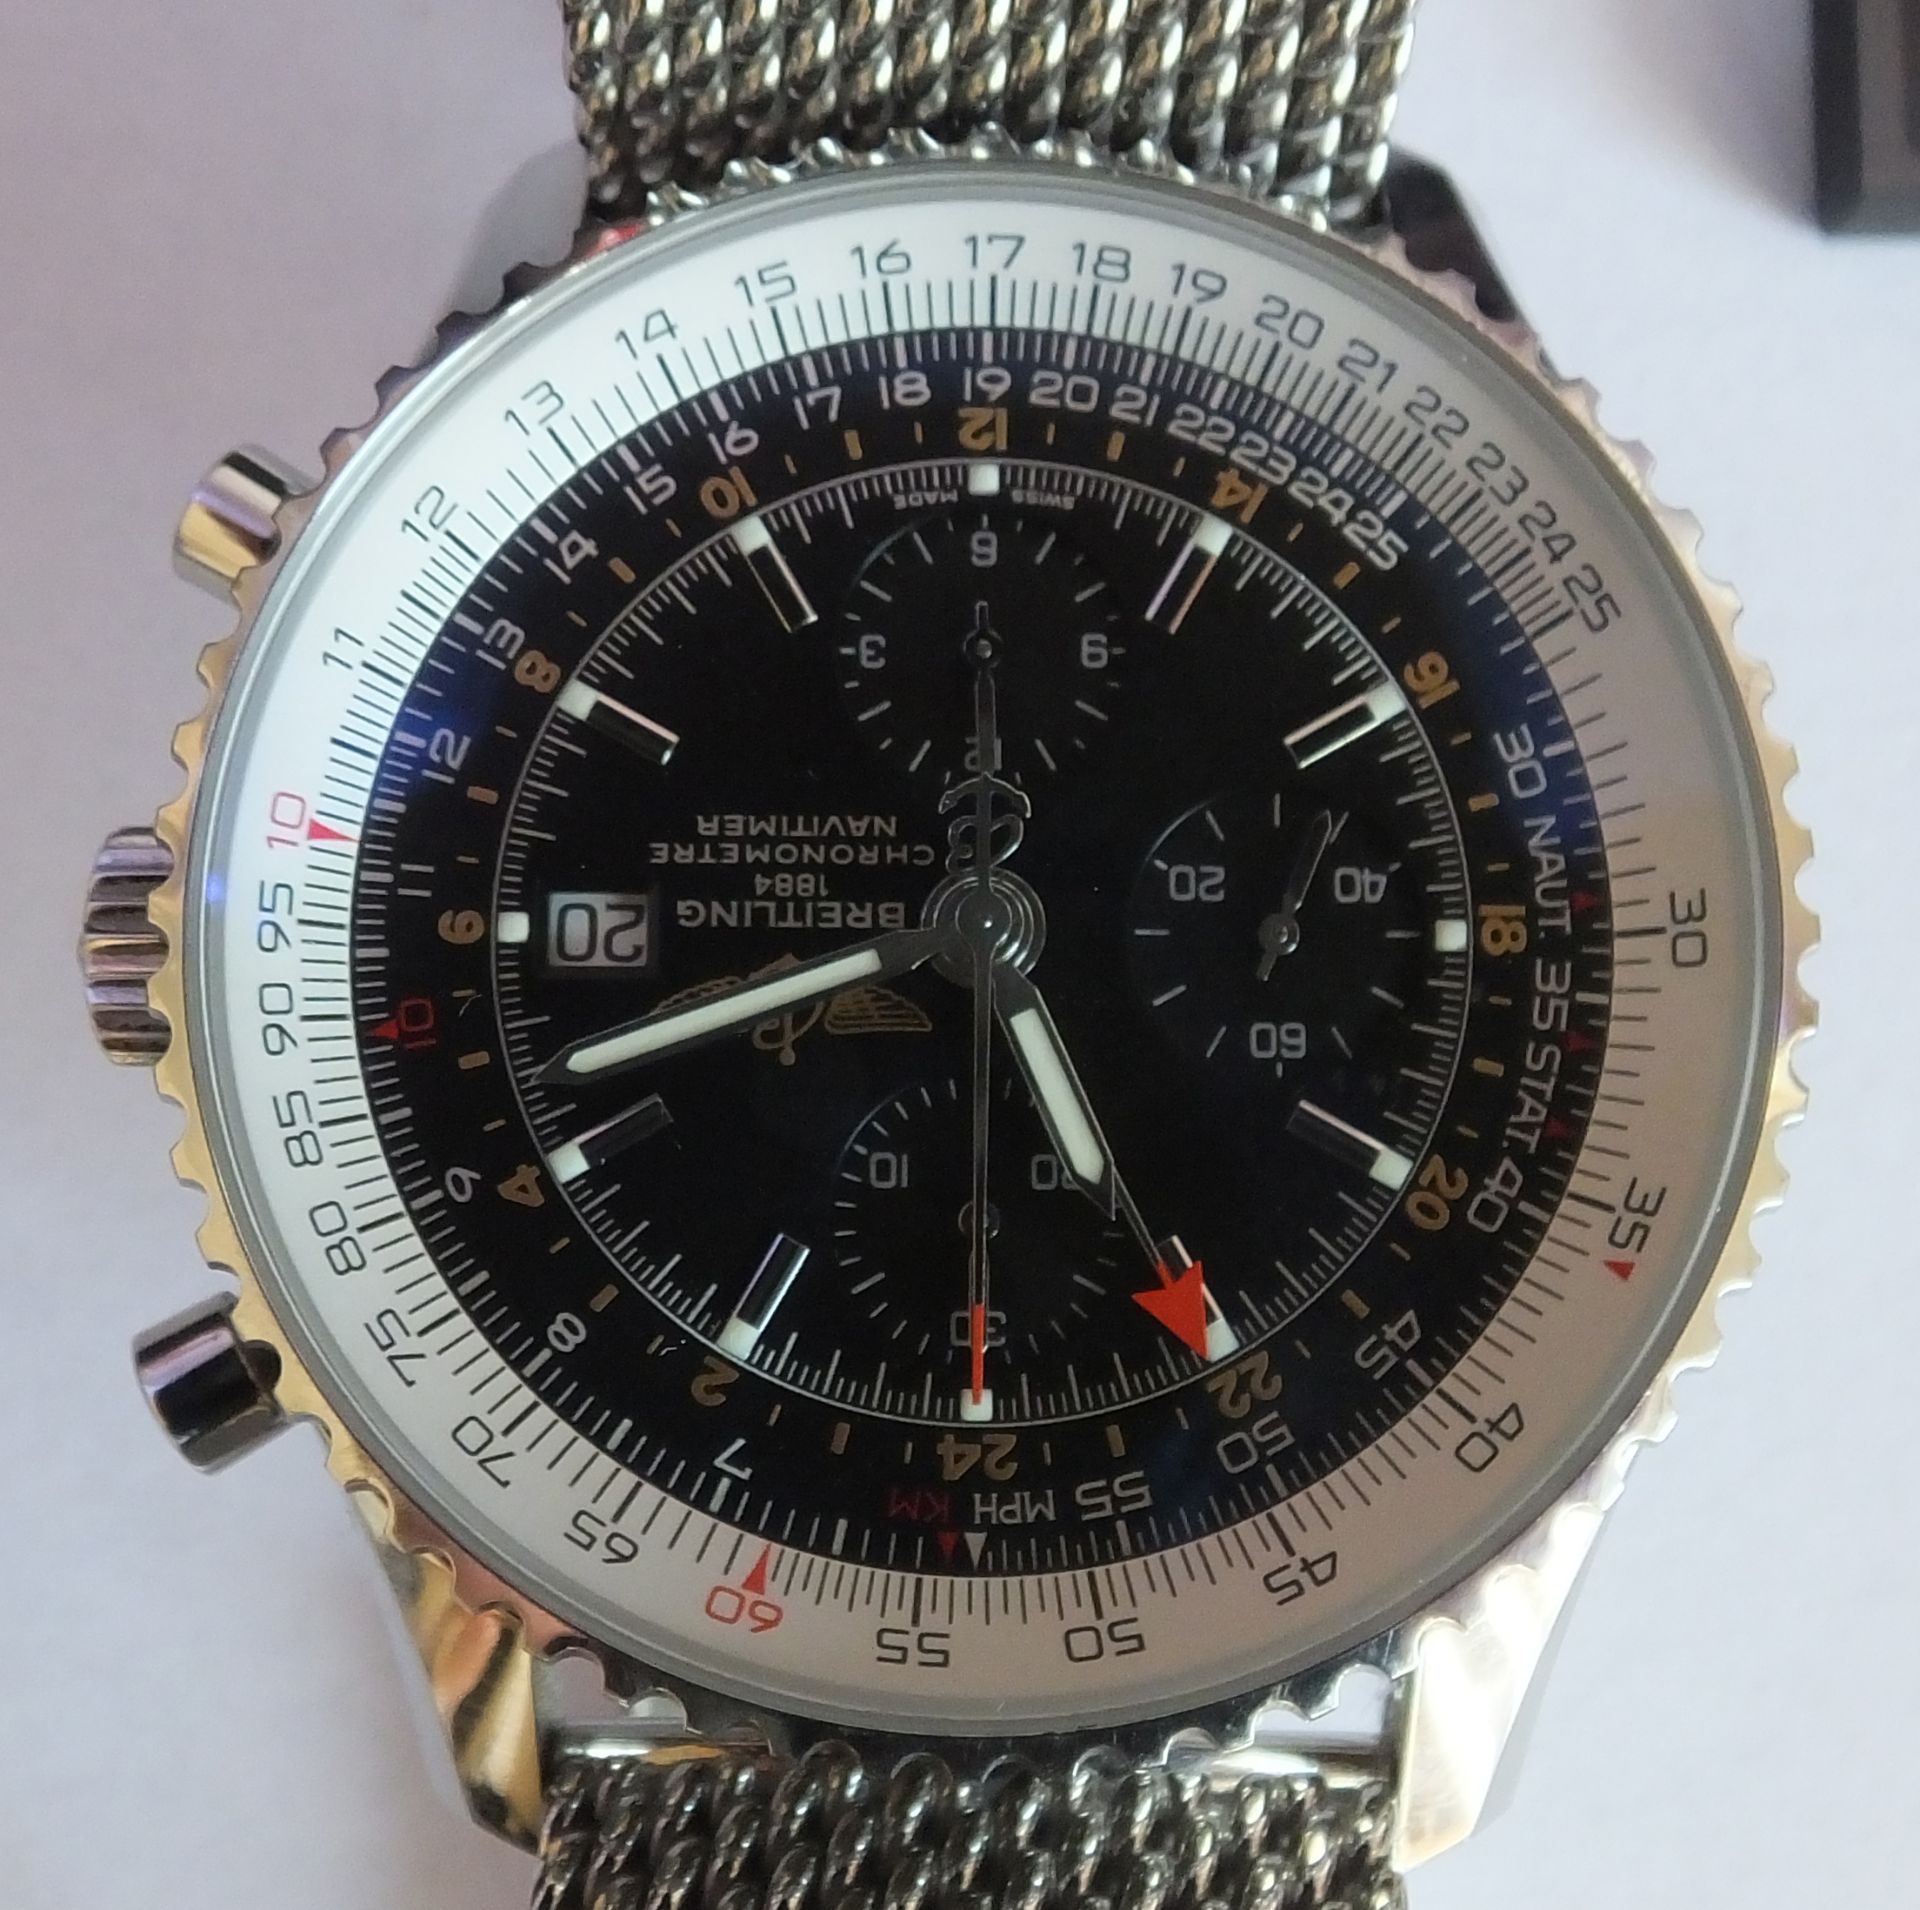 A Very Rare Breitling Navitimer World with Box, papers, and 5 year electronic world wide waranty.